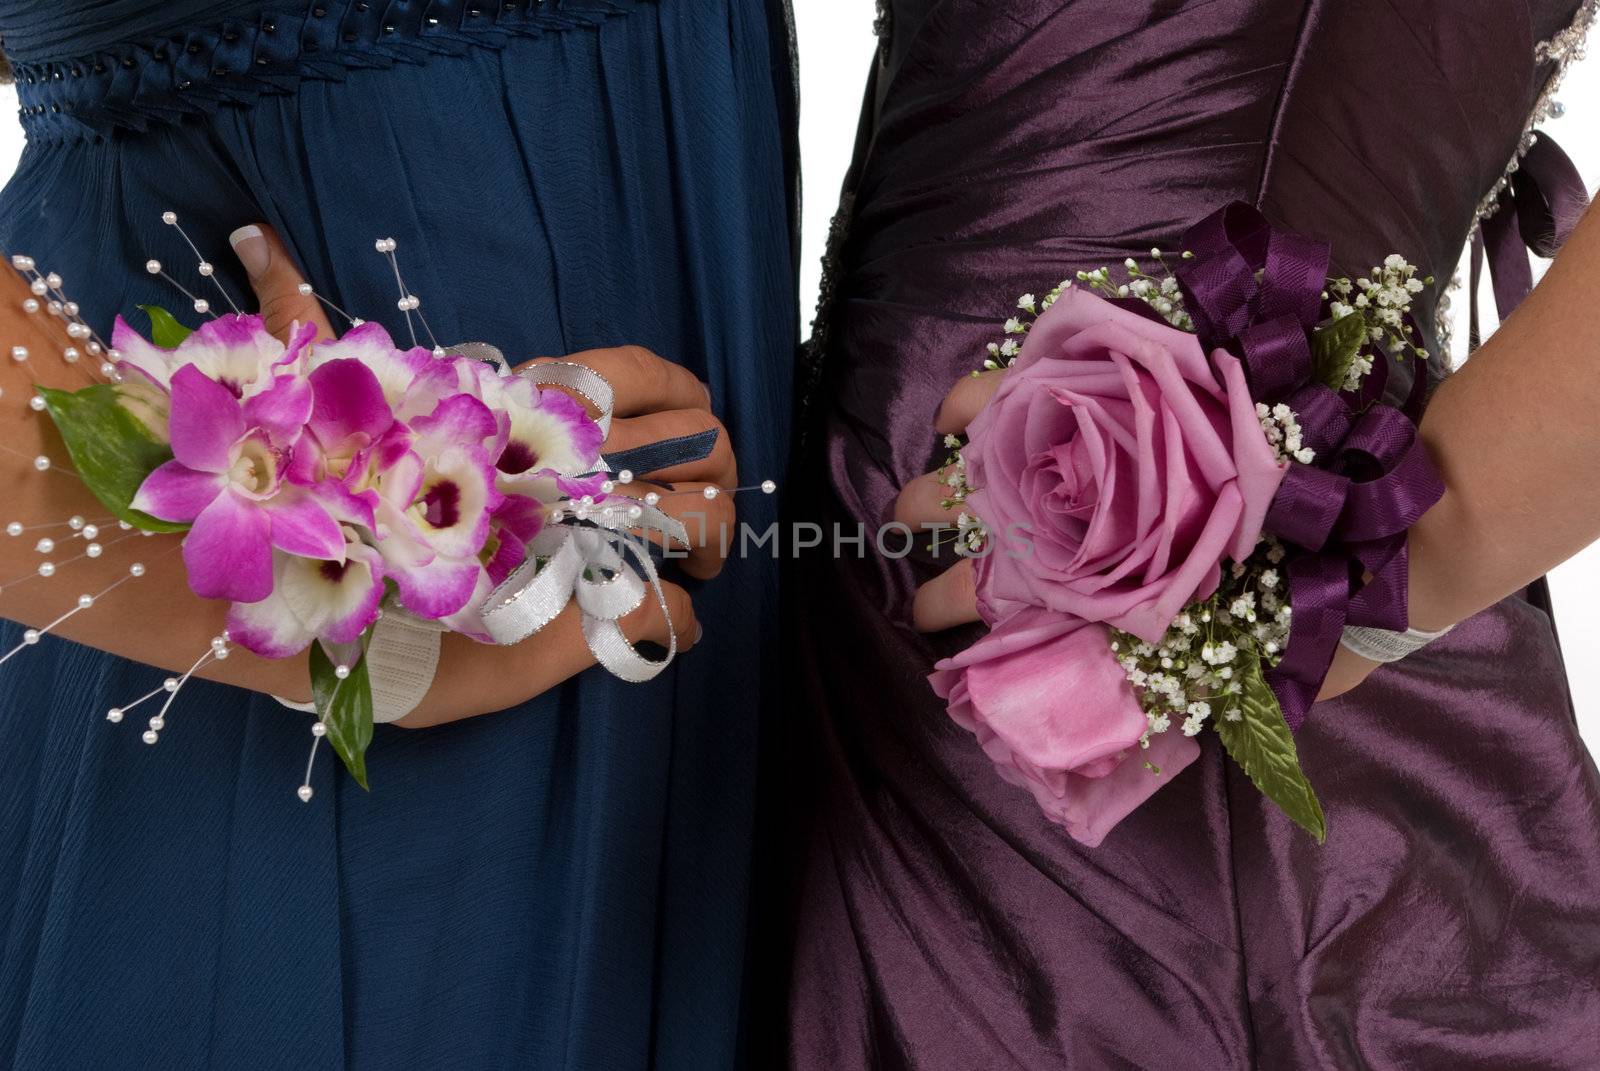 
Prom or wedding corsages